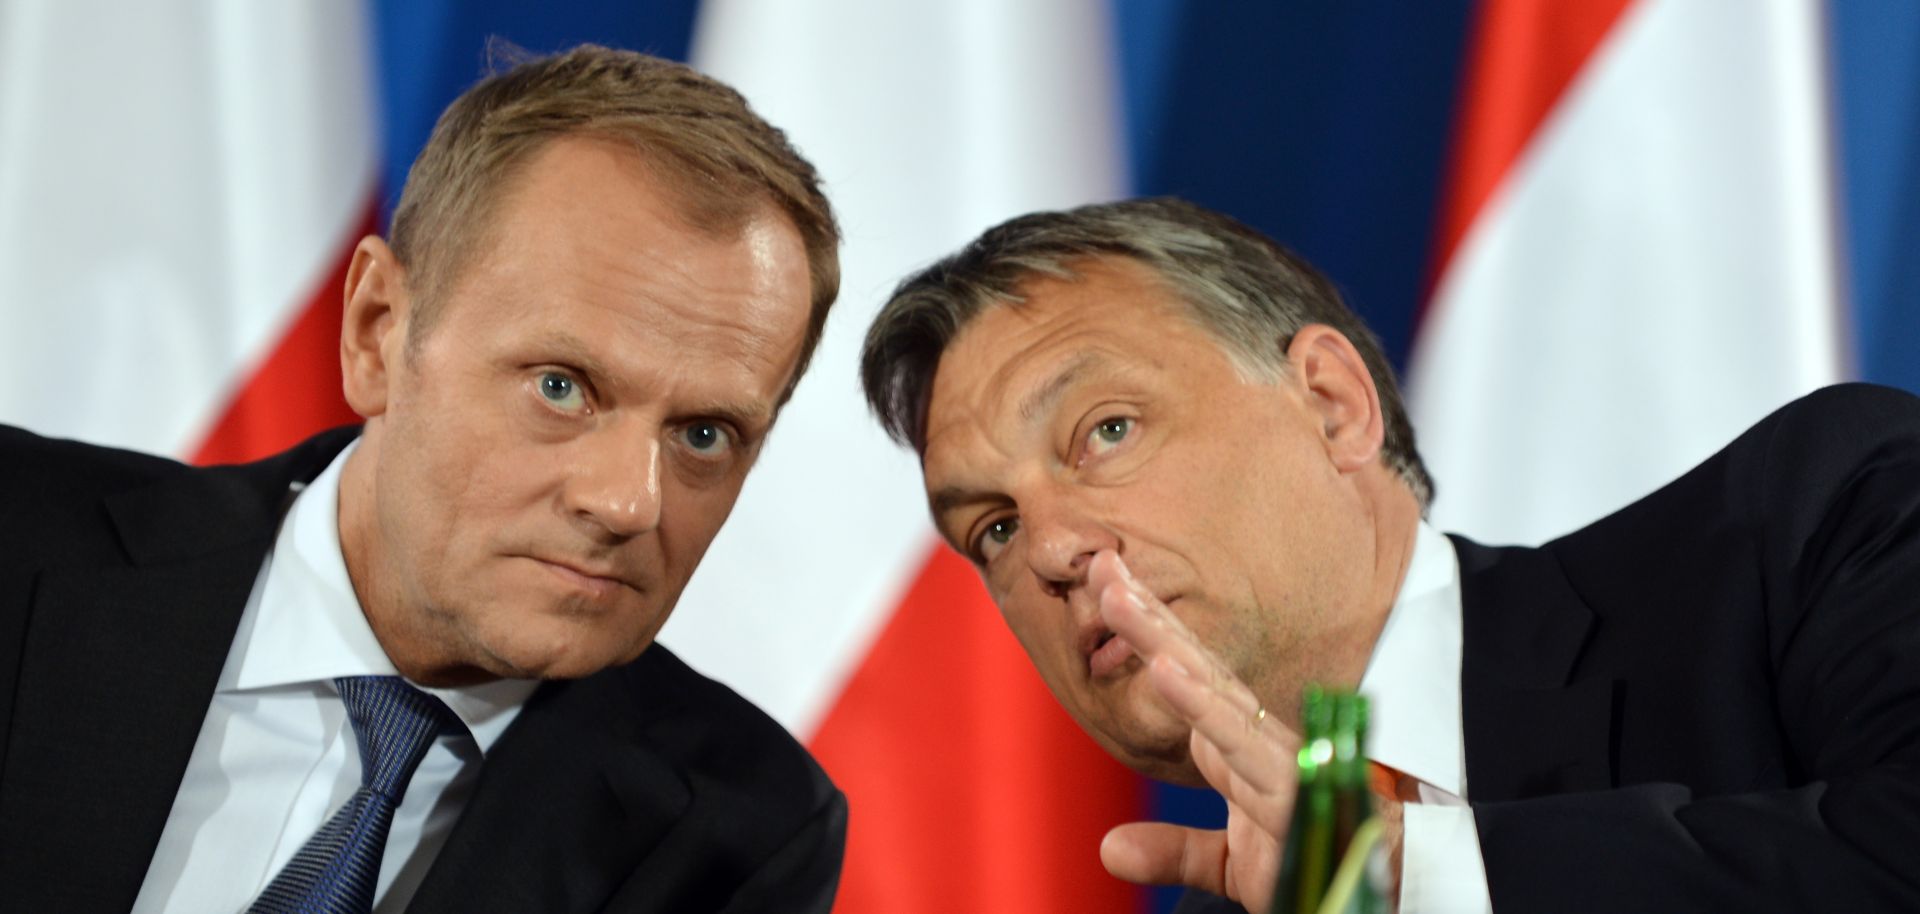 How the European Crisis Affects the Visegrad Group